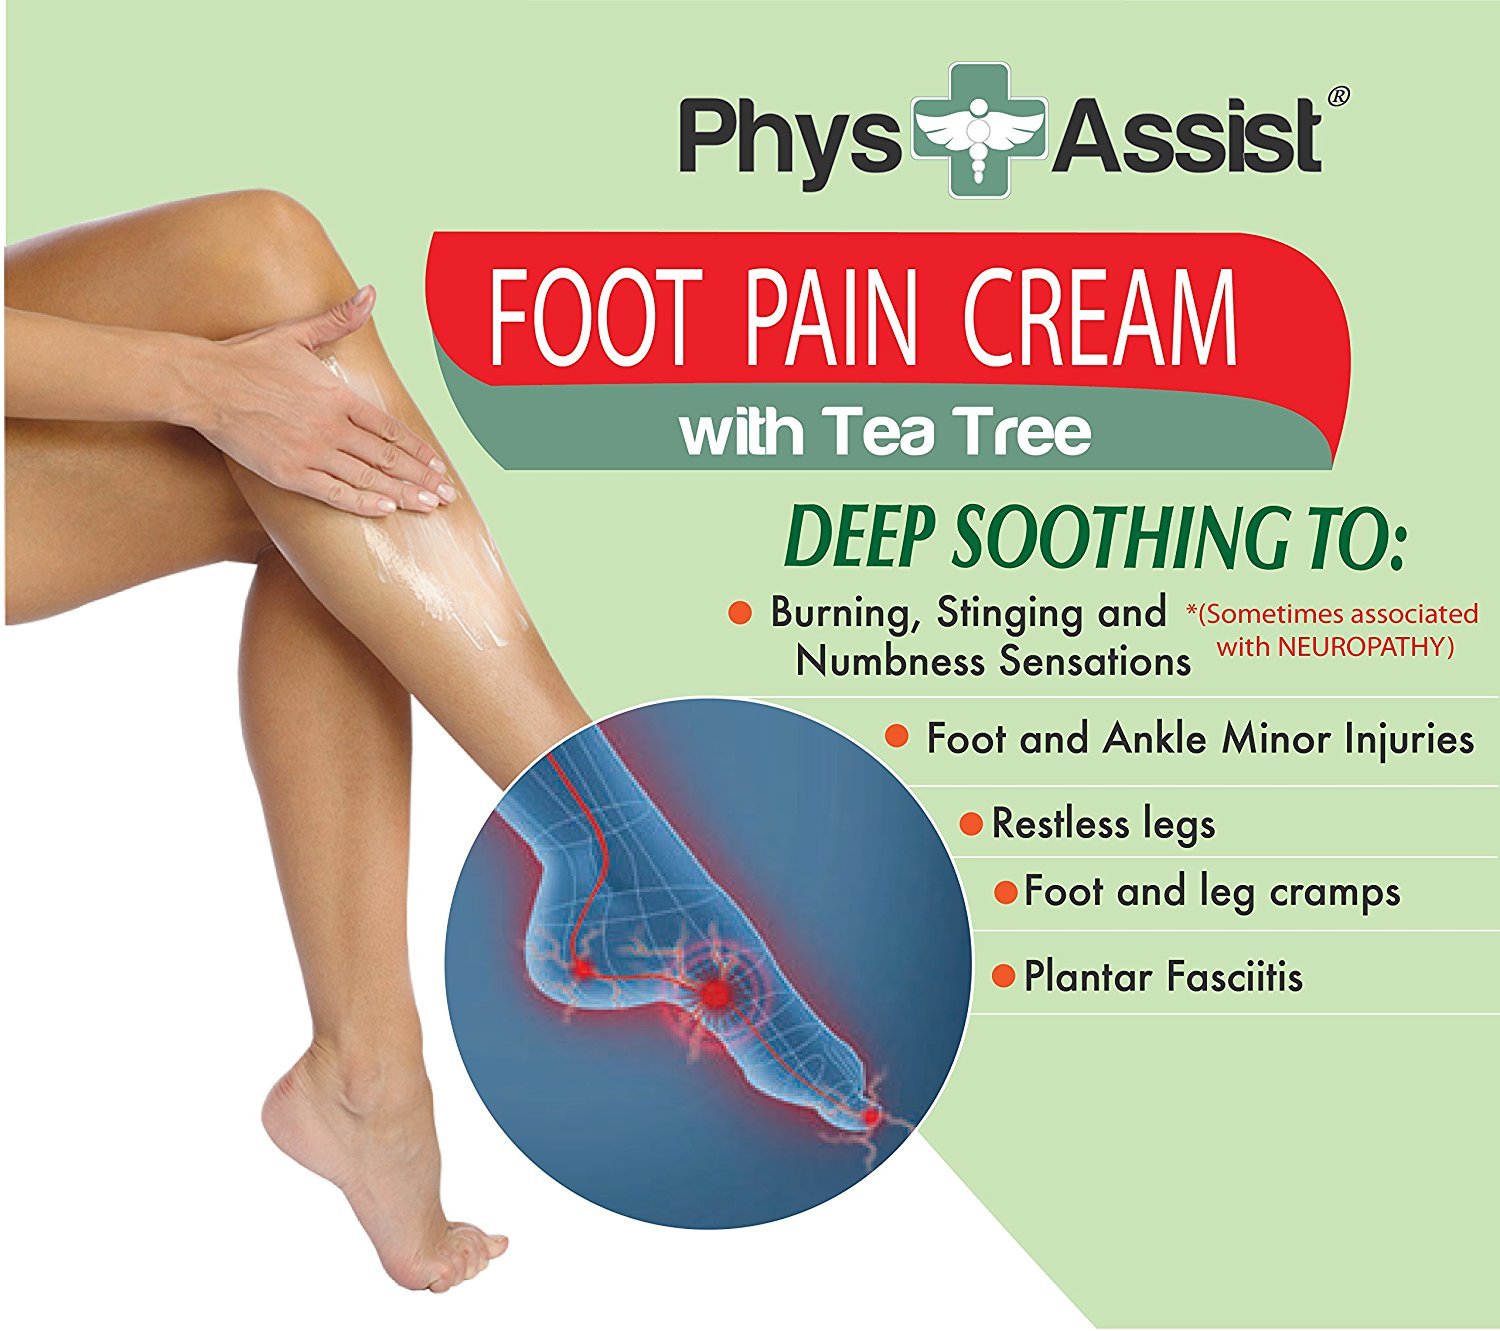 PhysAssist Foot Pain Cream, Soothing to Feet and Legs. 4 oz Jar